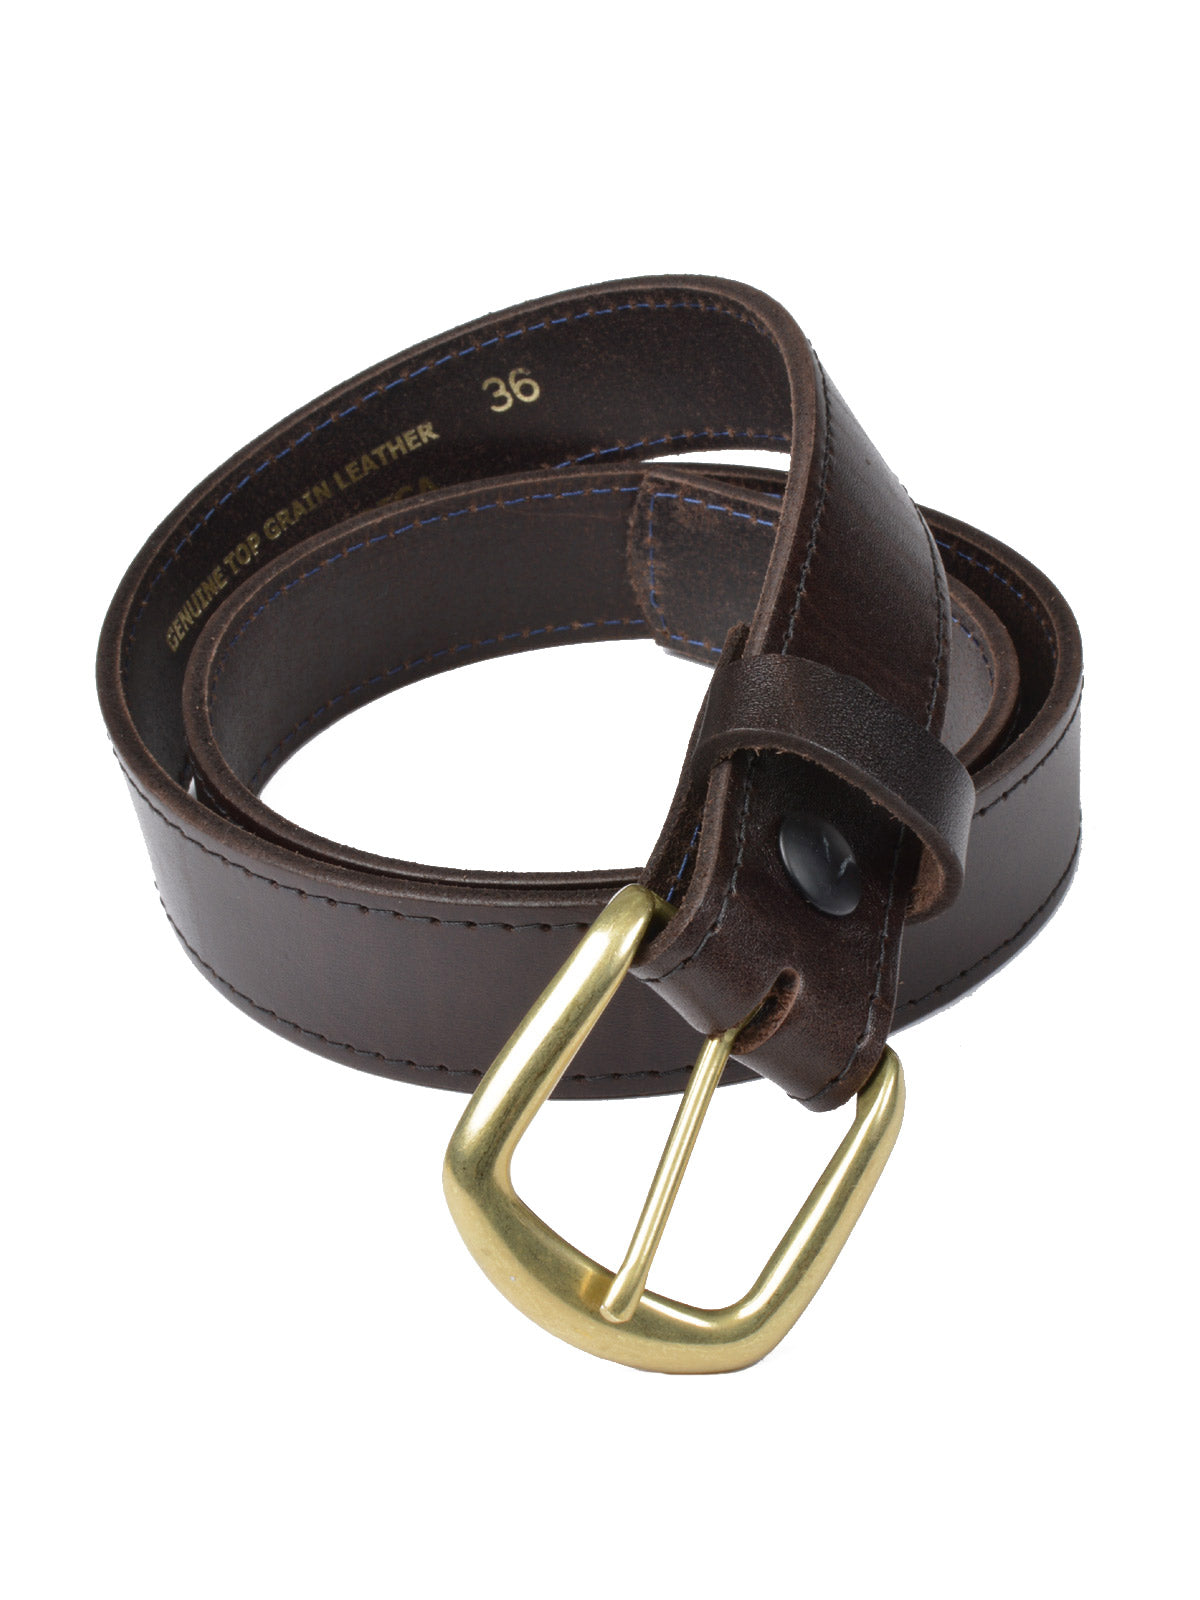 Marc Wolf Oil Tanned Top Grain Leather Belts in Brown 208C-BRN (56-70)